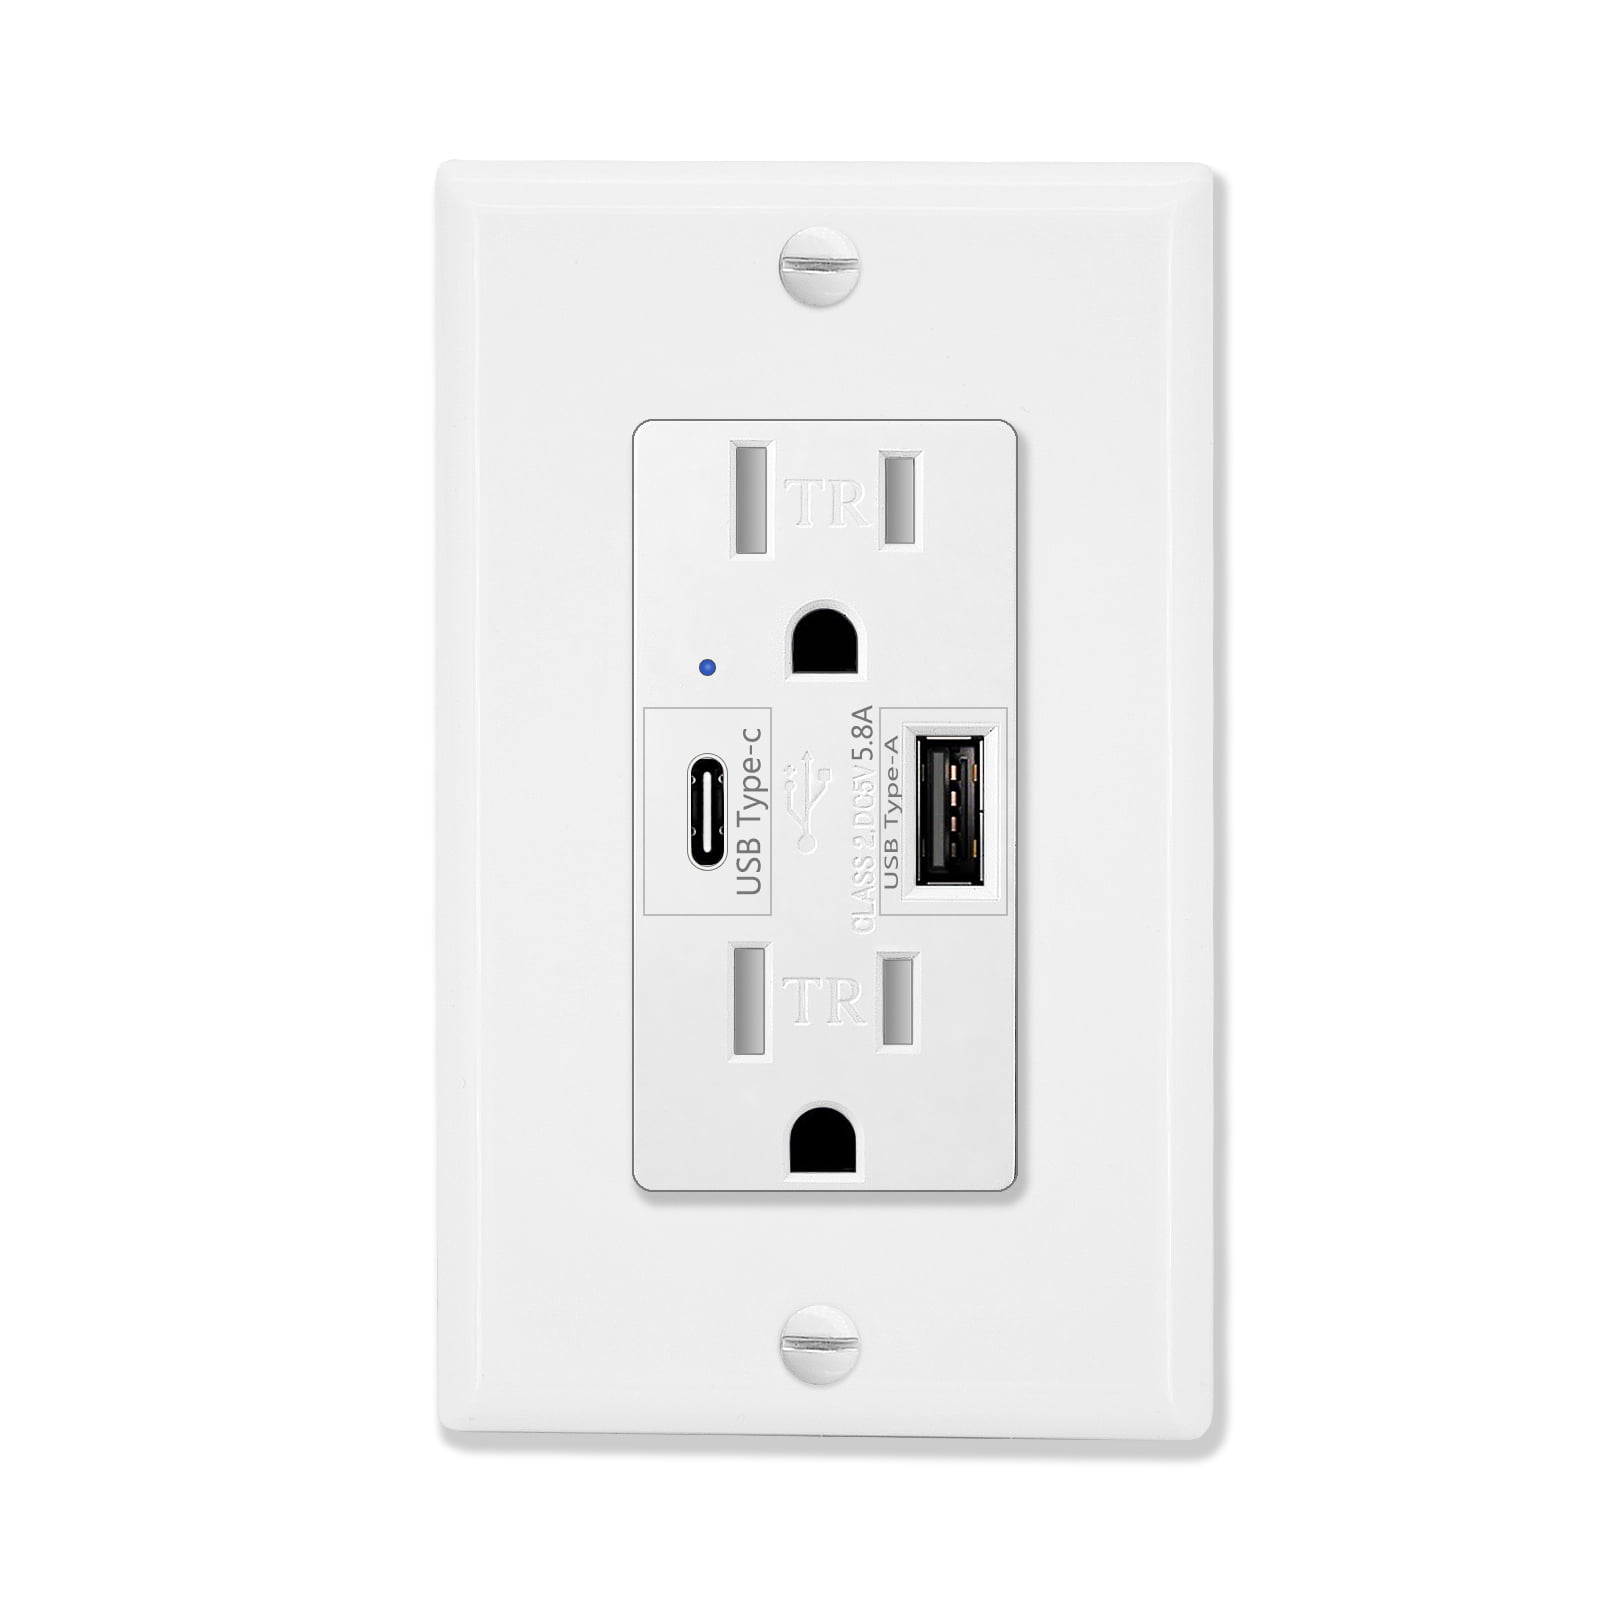 USB MOBILE PHONE TABLET CHARGE PIFCO 1 2 GANG SINGLE DOUBLE SWITCH WALL SOCKET